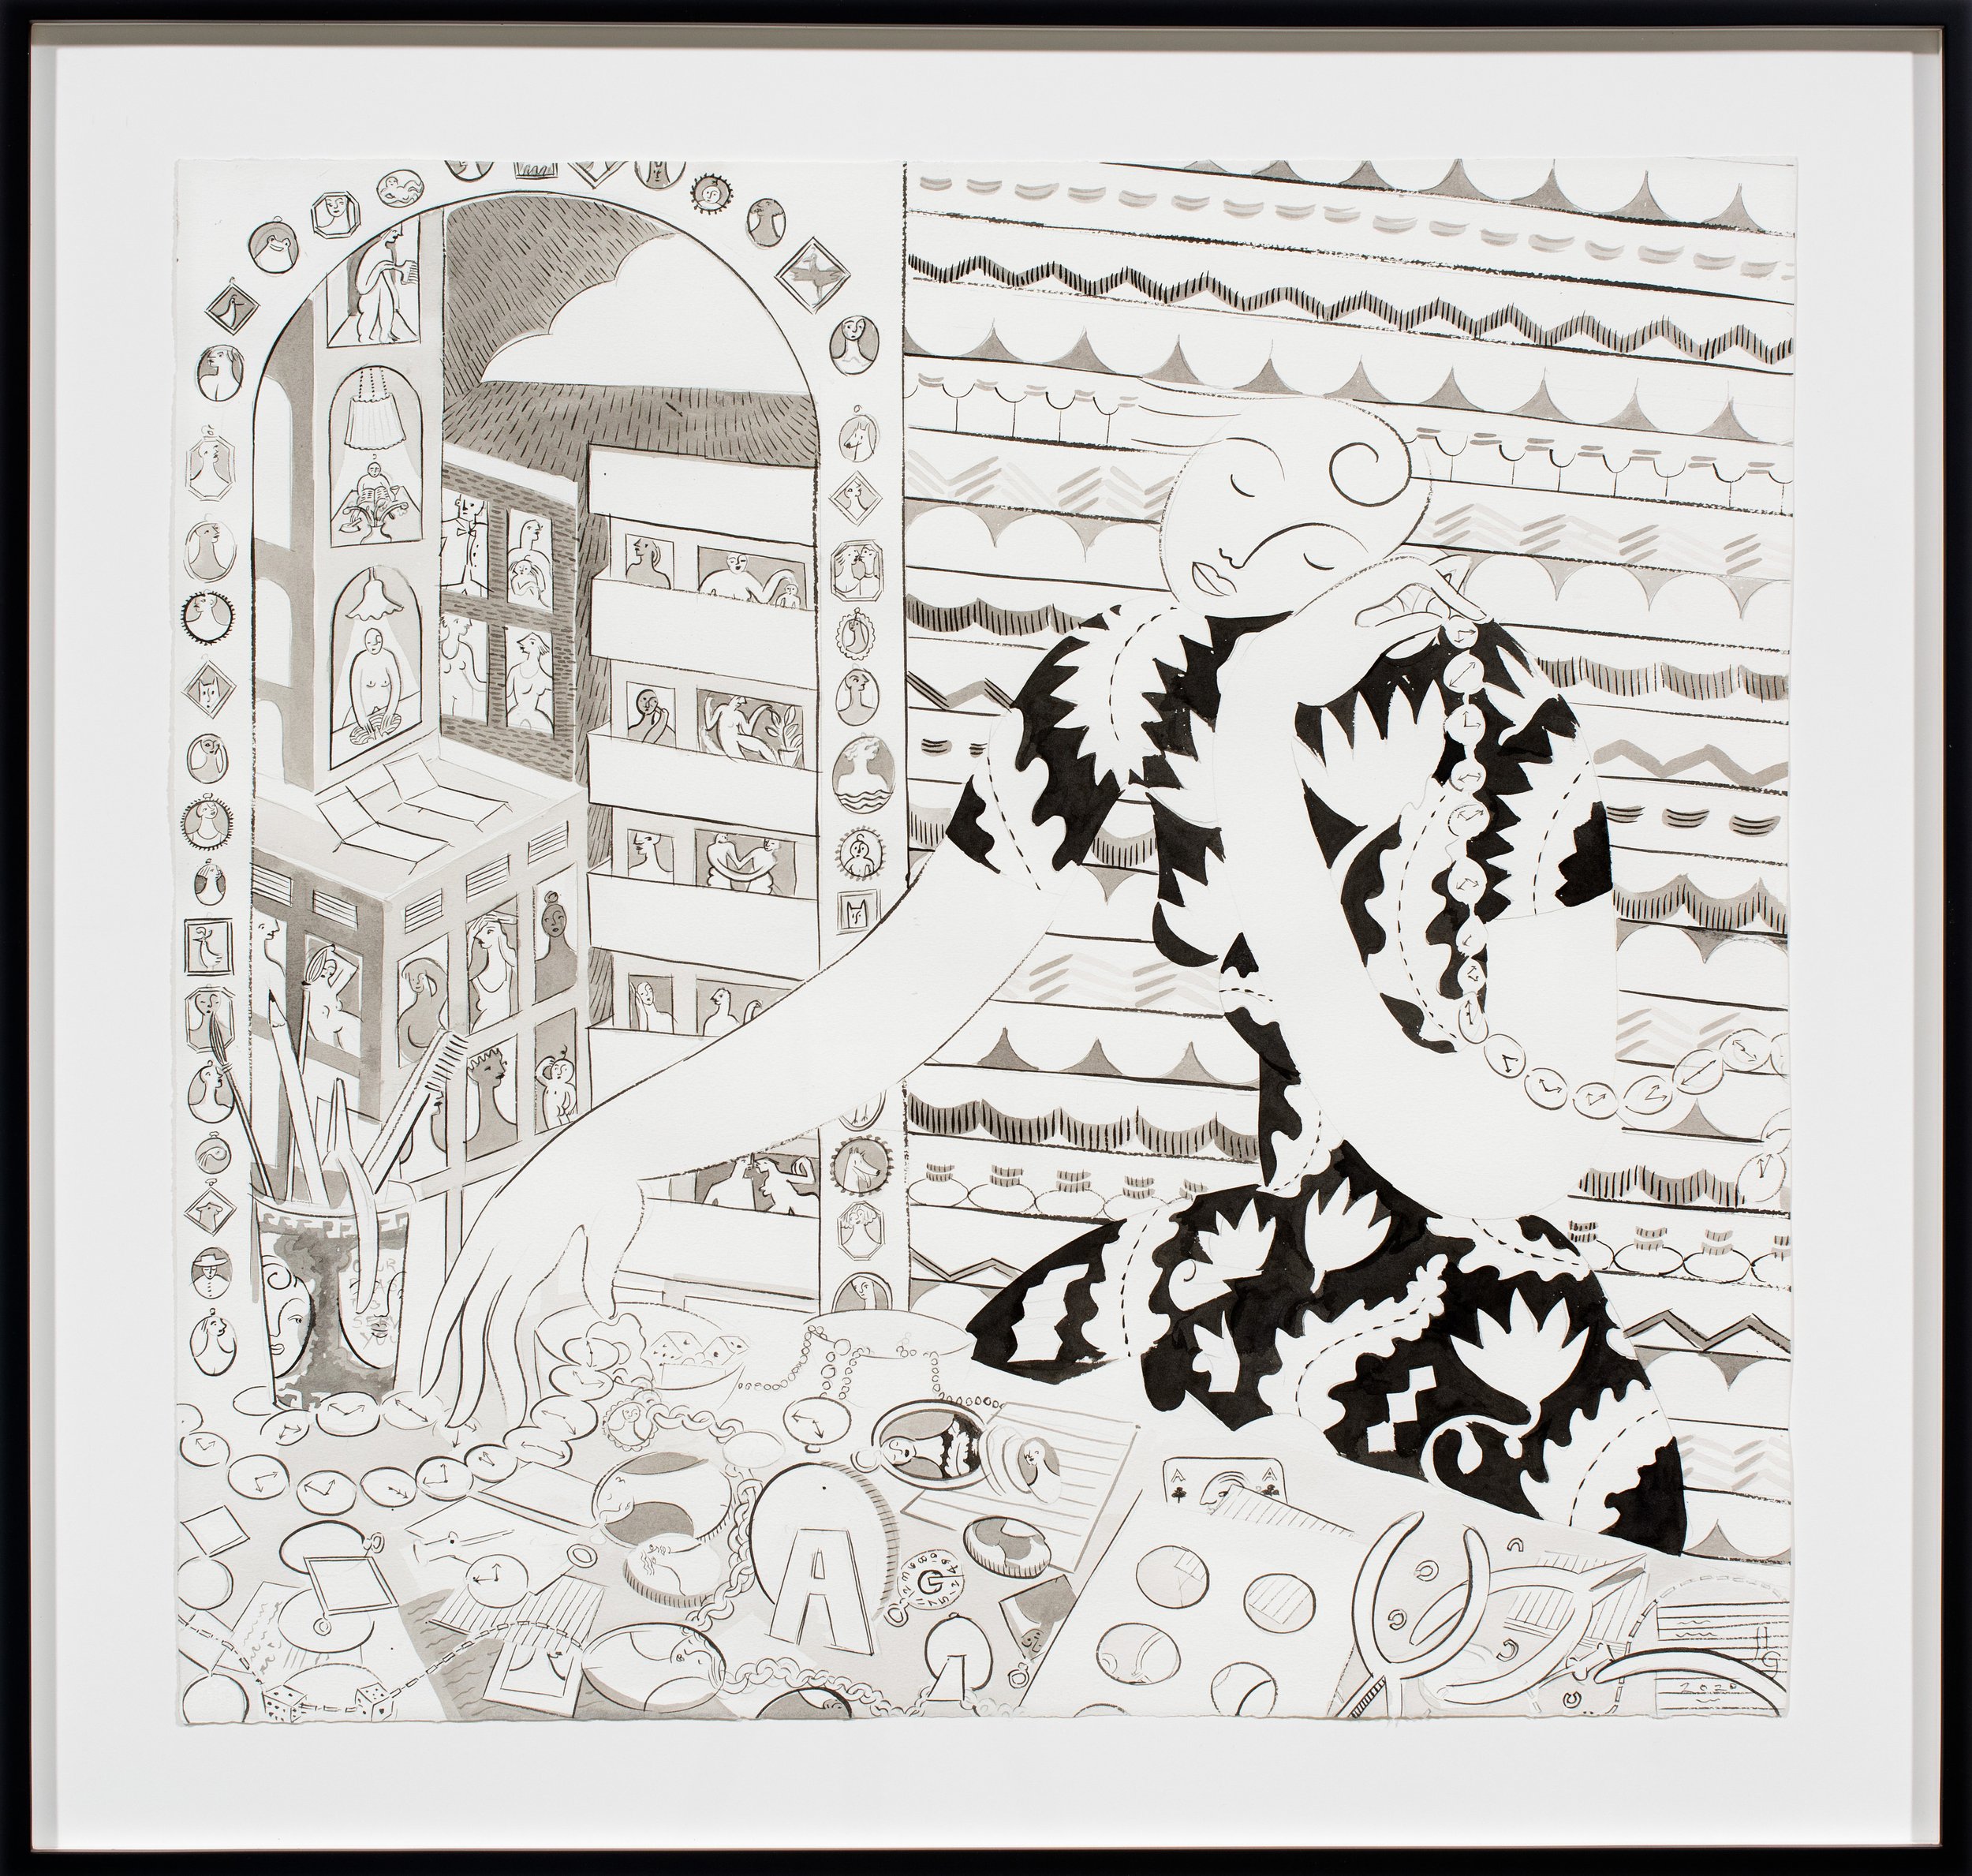   The Little Things,  2020  Ink, ink wash, and pencil on paper  26 1/2 x 28 x 1 3/4 inches (framed)  